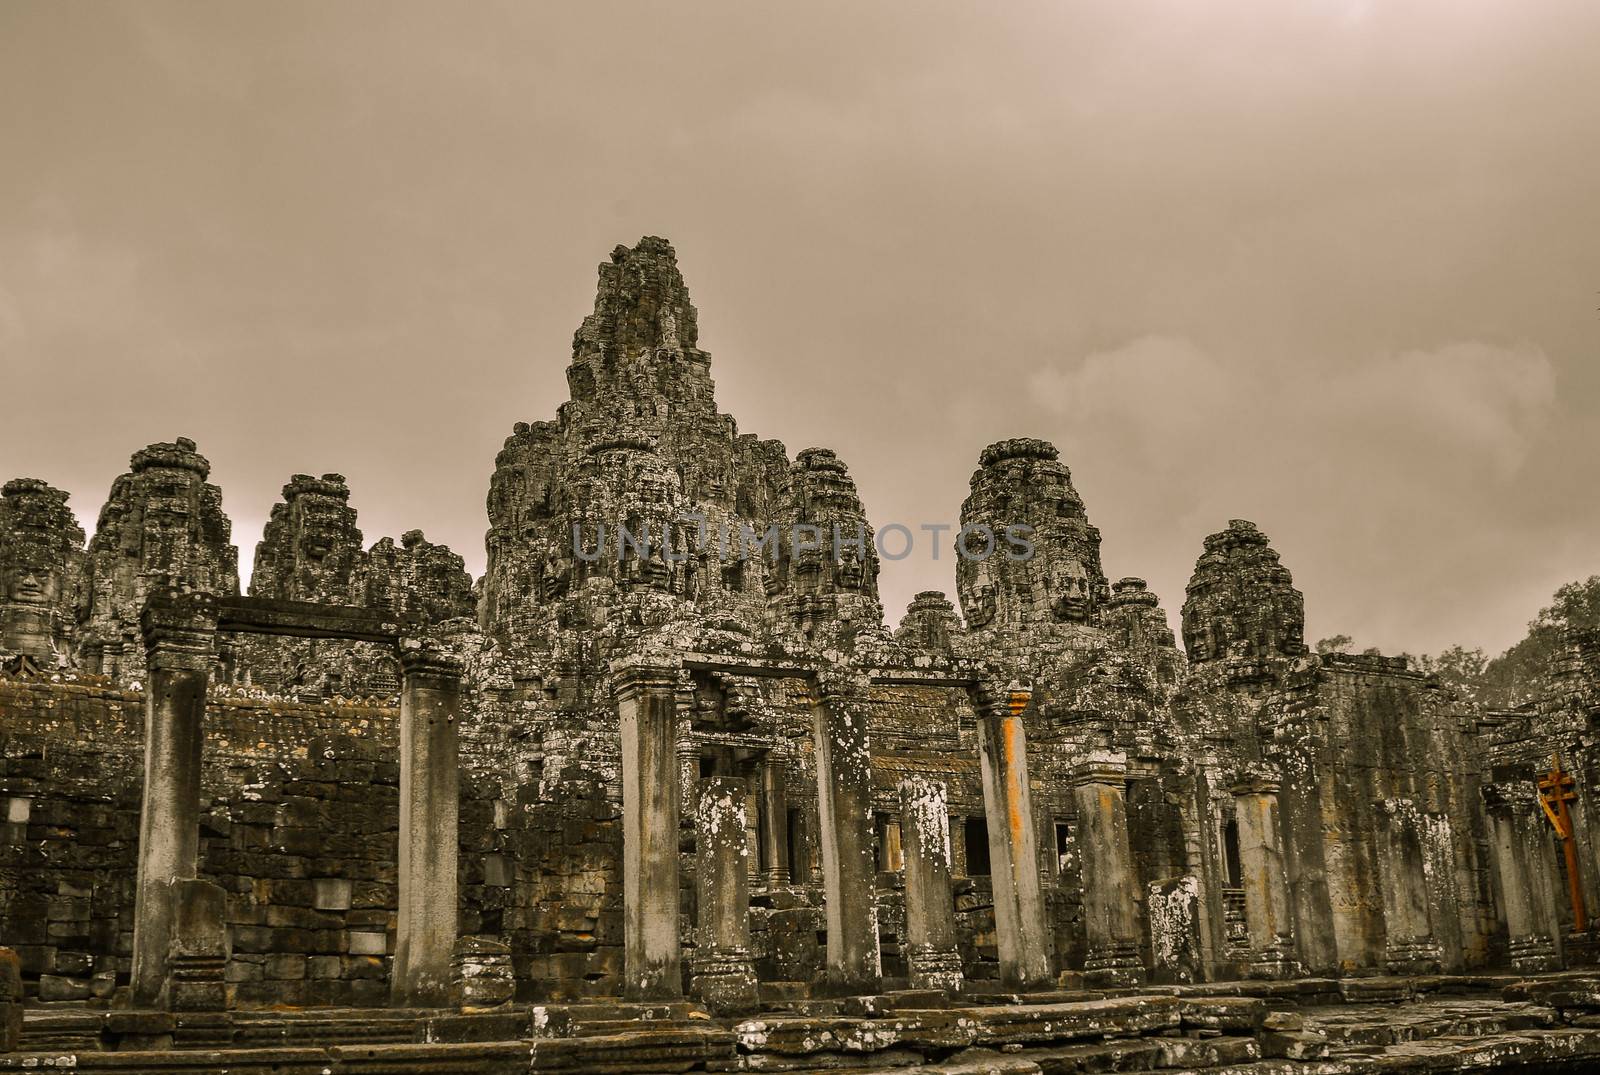 Bayon Temple and Angkor Wat Khmer complex in Siem Reap, Cambodia by weltreisendertj